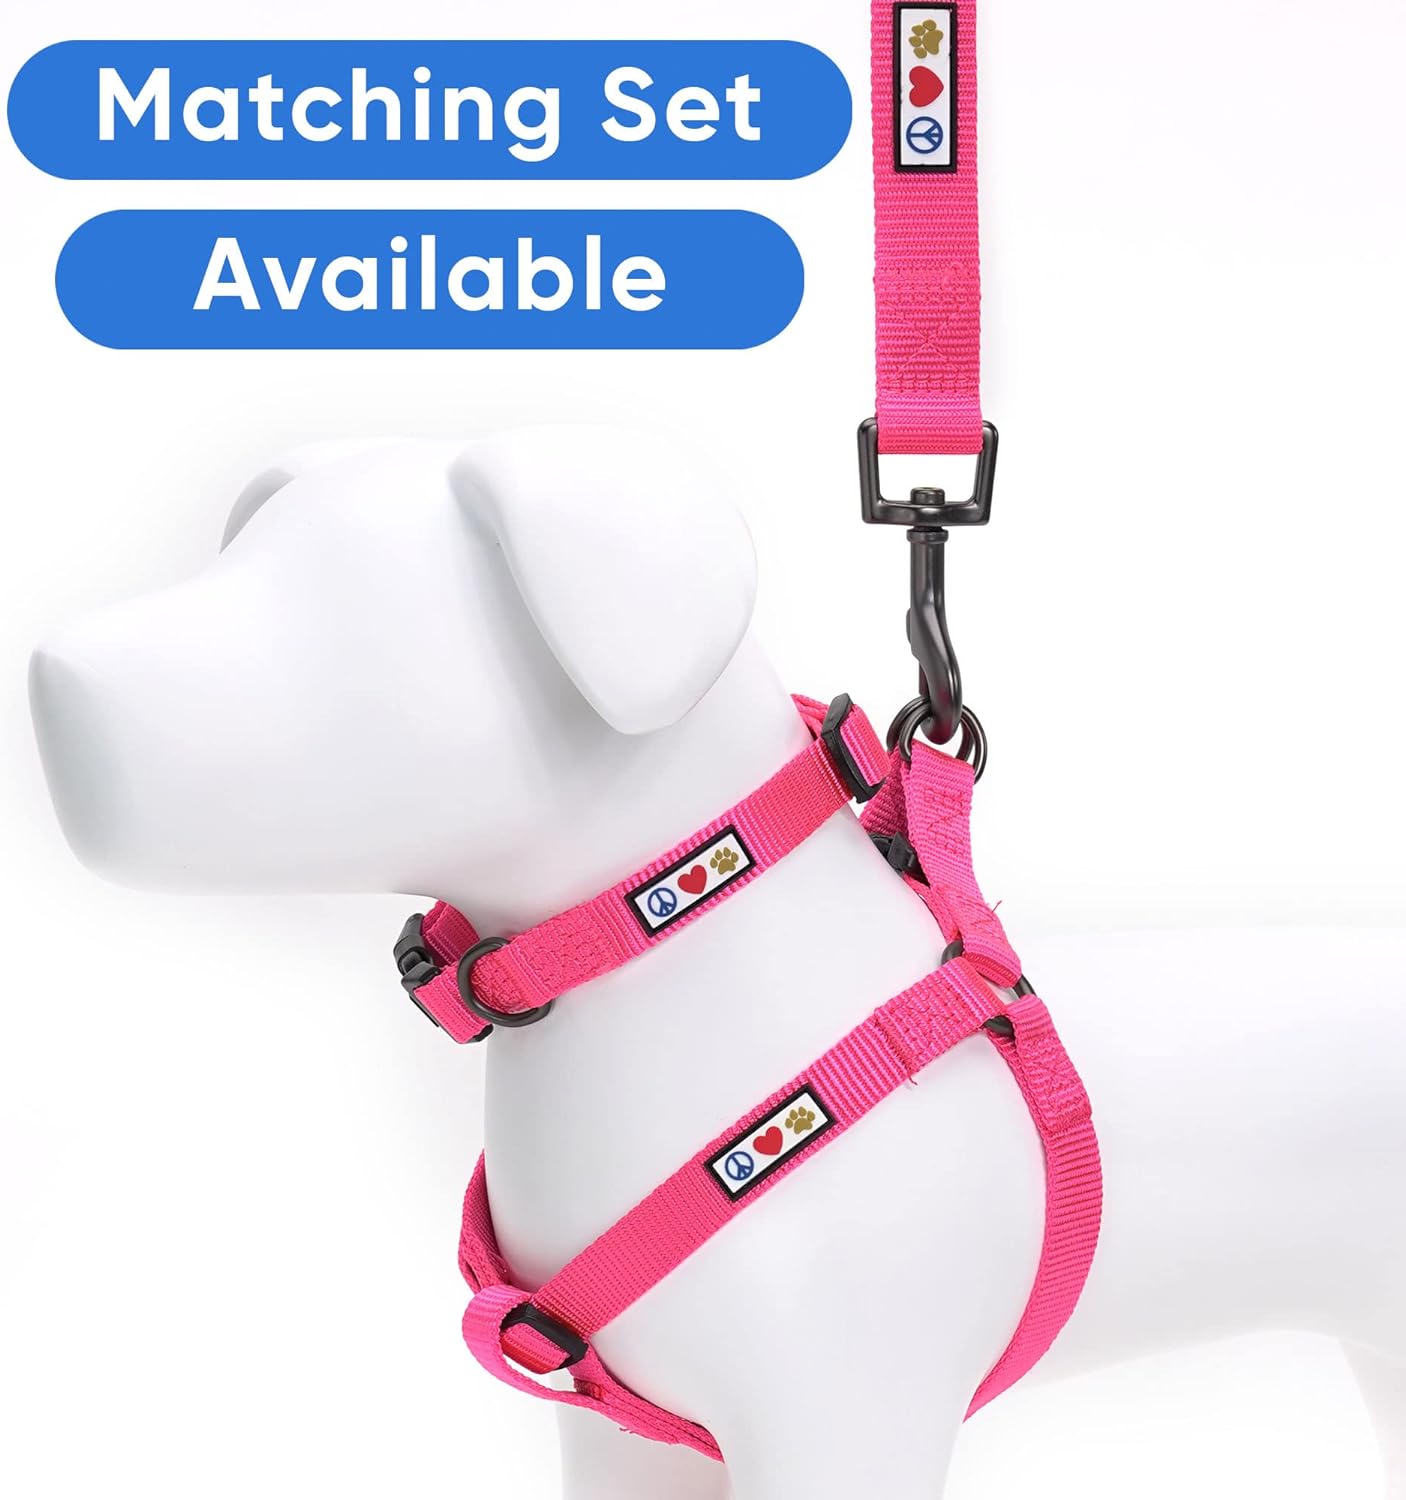 Pawtitas Dog Lead for Small Dogs Comfortable Handle Training Dog Lead 1.8m Long Dog Lead Puppy Lead - Solid Pink Dog Lead for Small Breeds :Pet Supplies